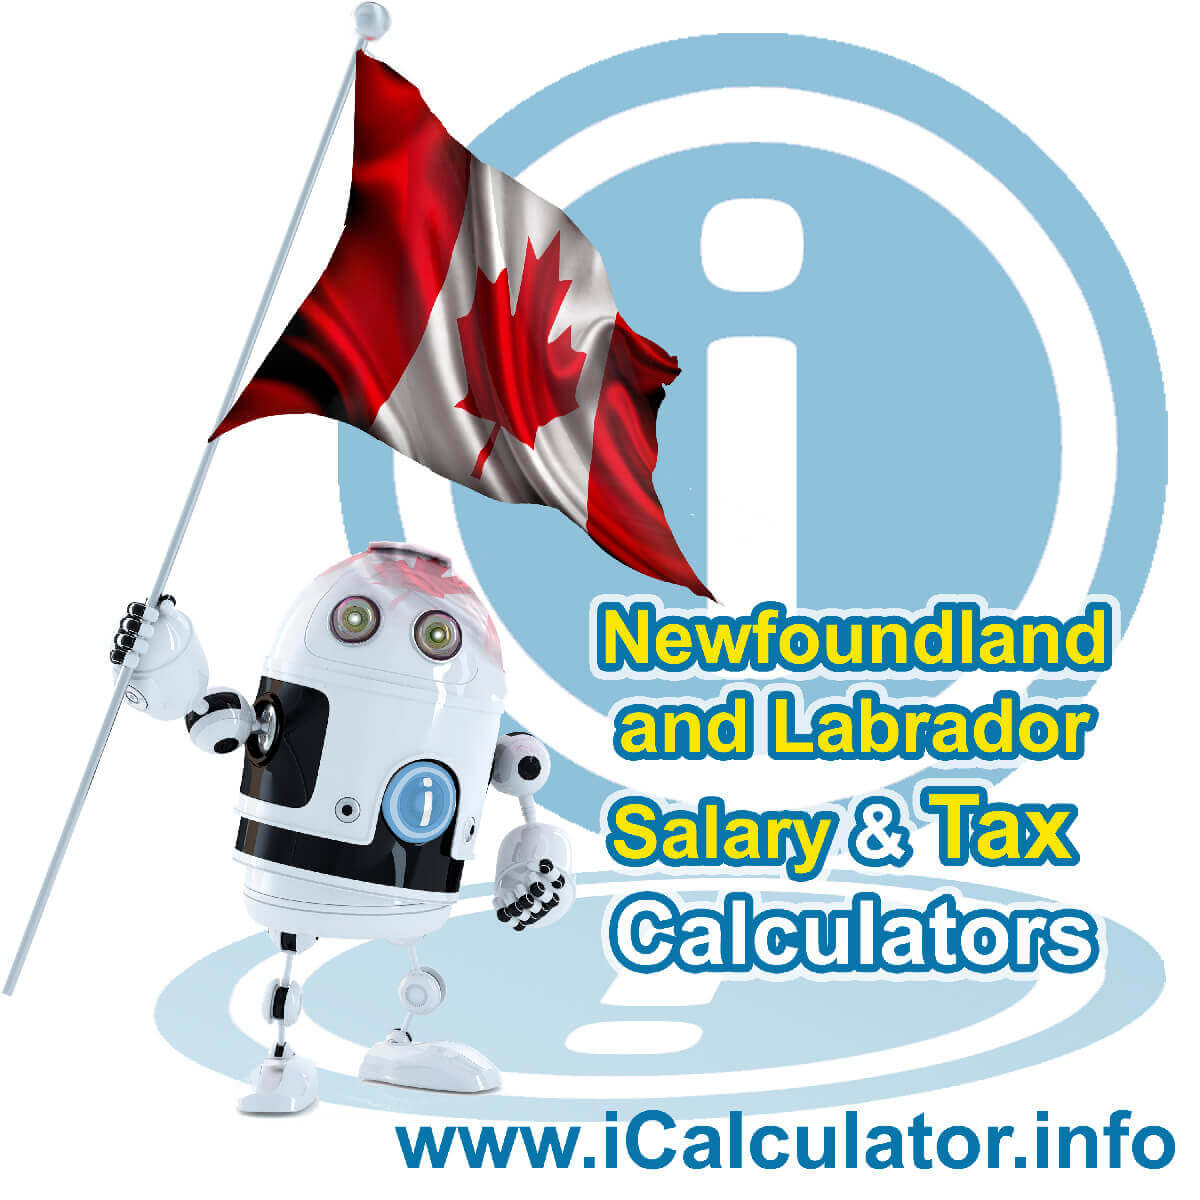 Canada Tax Calculator. This image shows the Canada flag and information relating to the tax formula for the Canada Salary Calculator